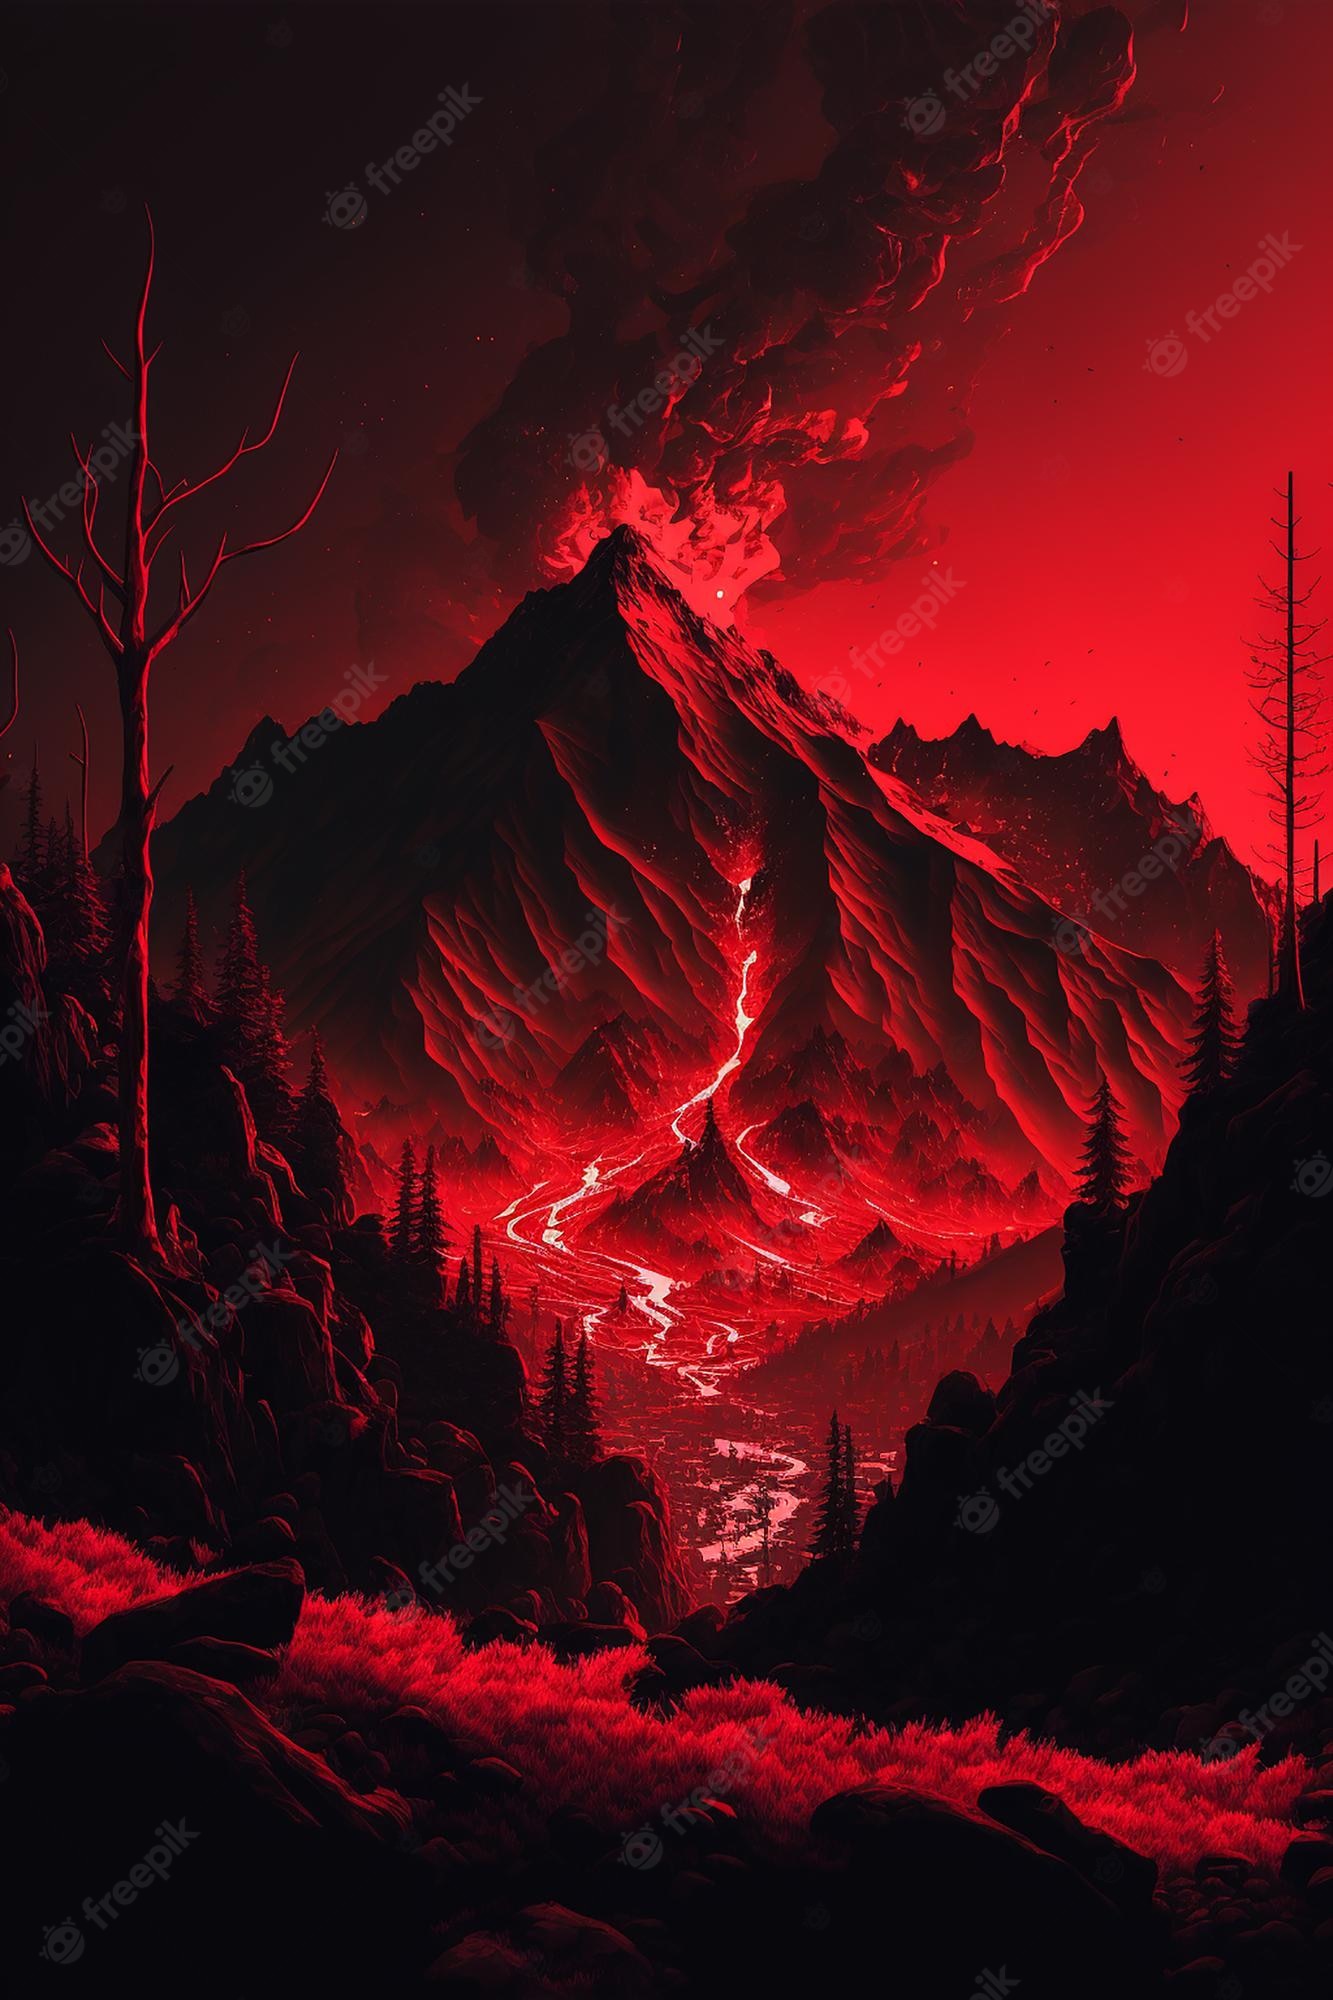 A red and black mountain with trees - Dark red